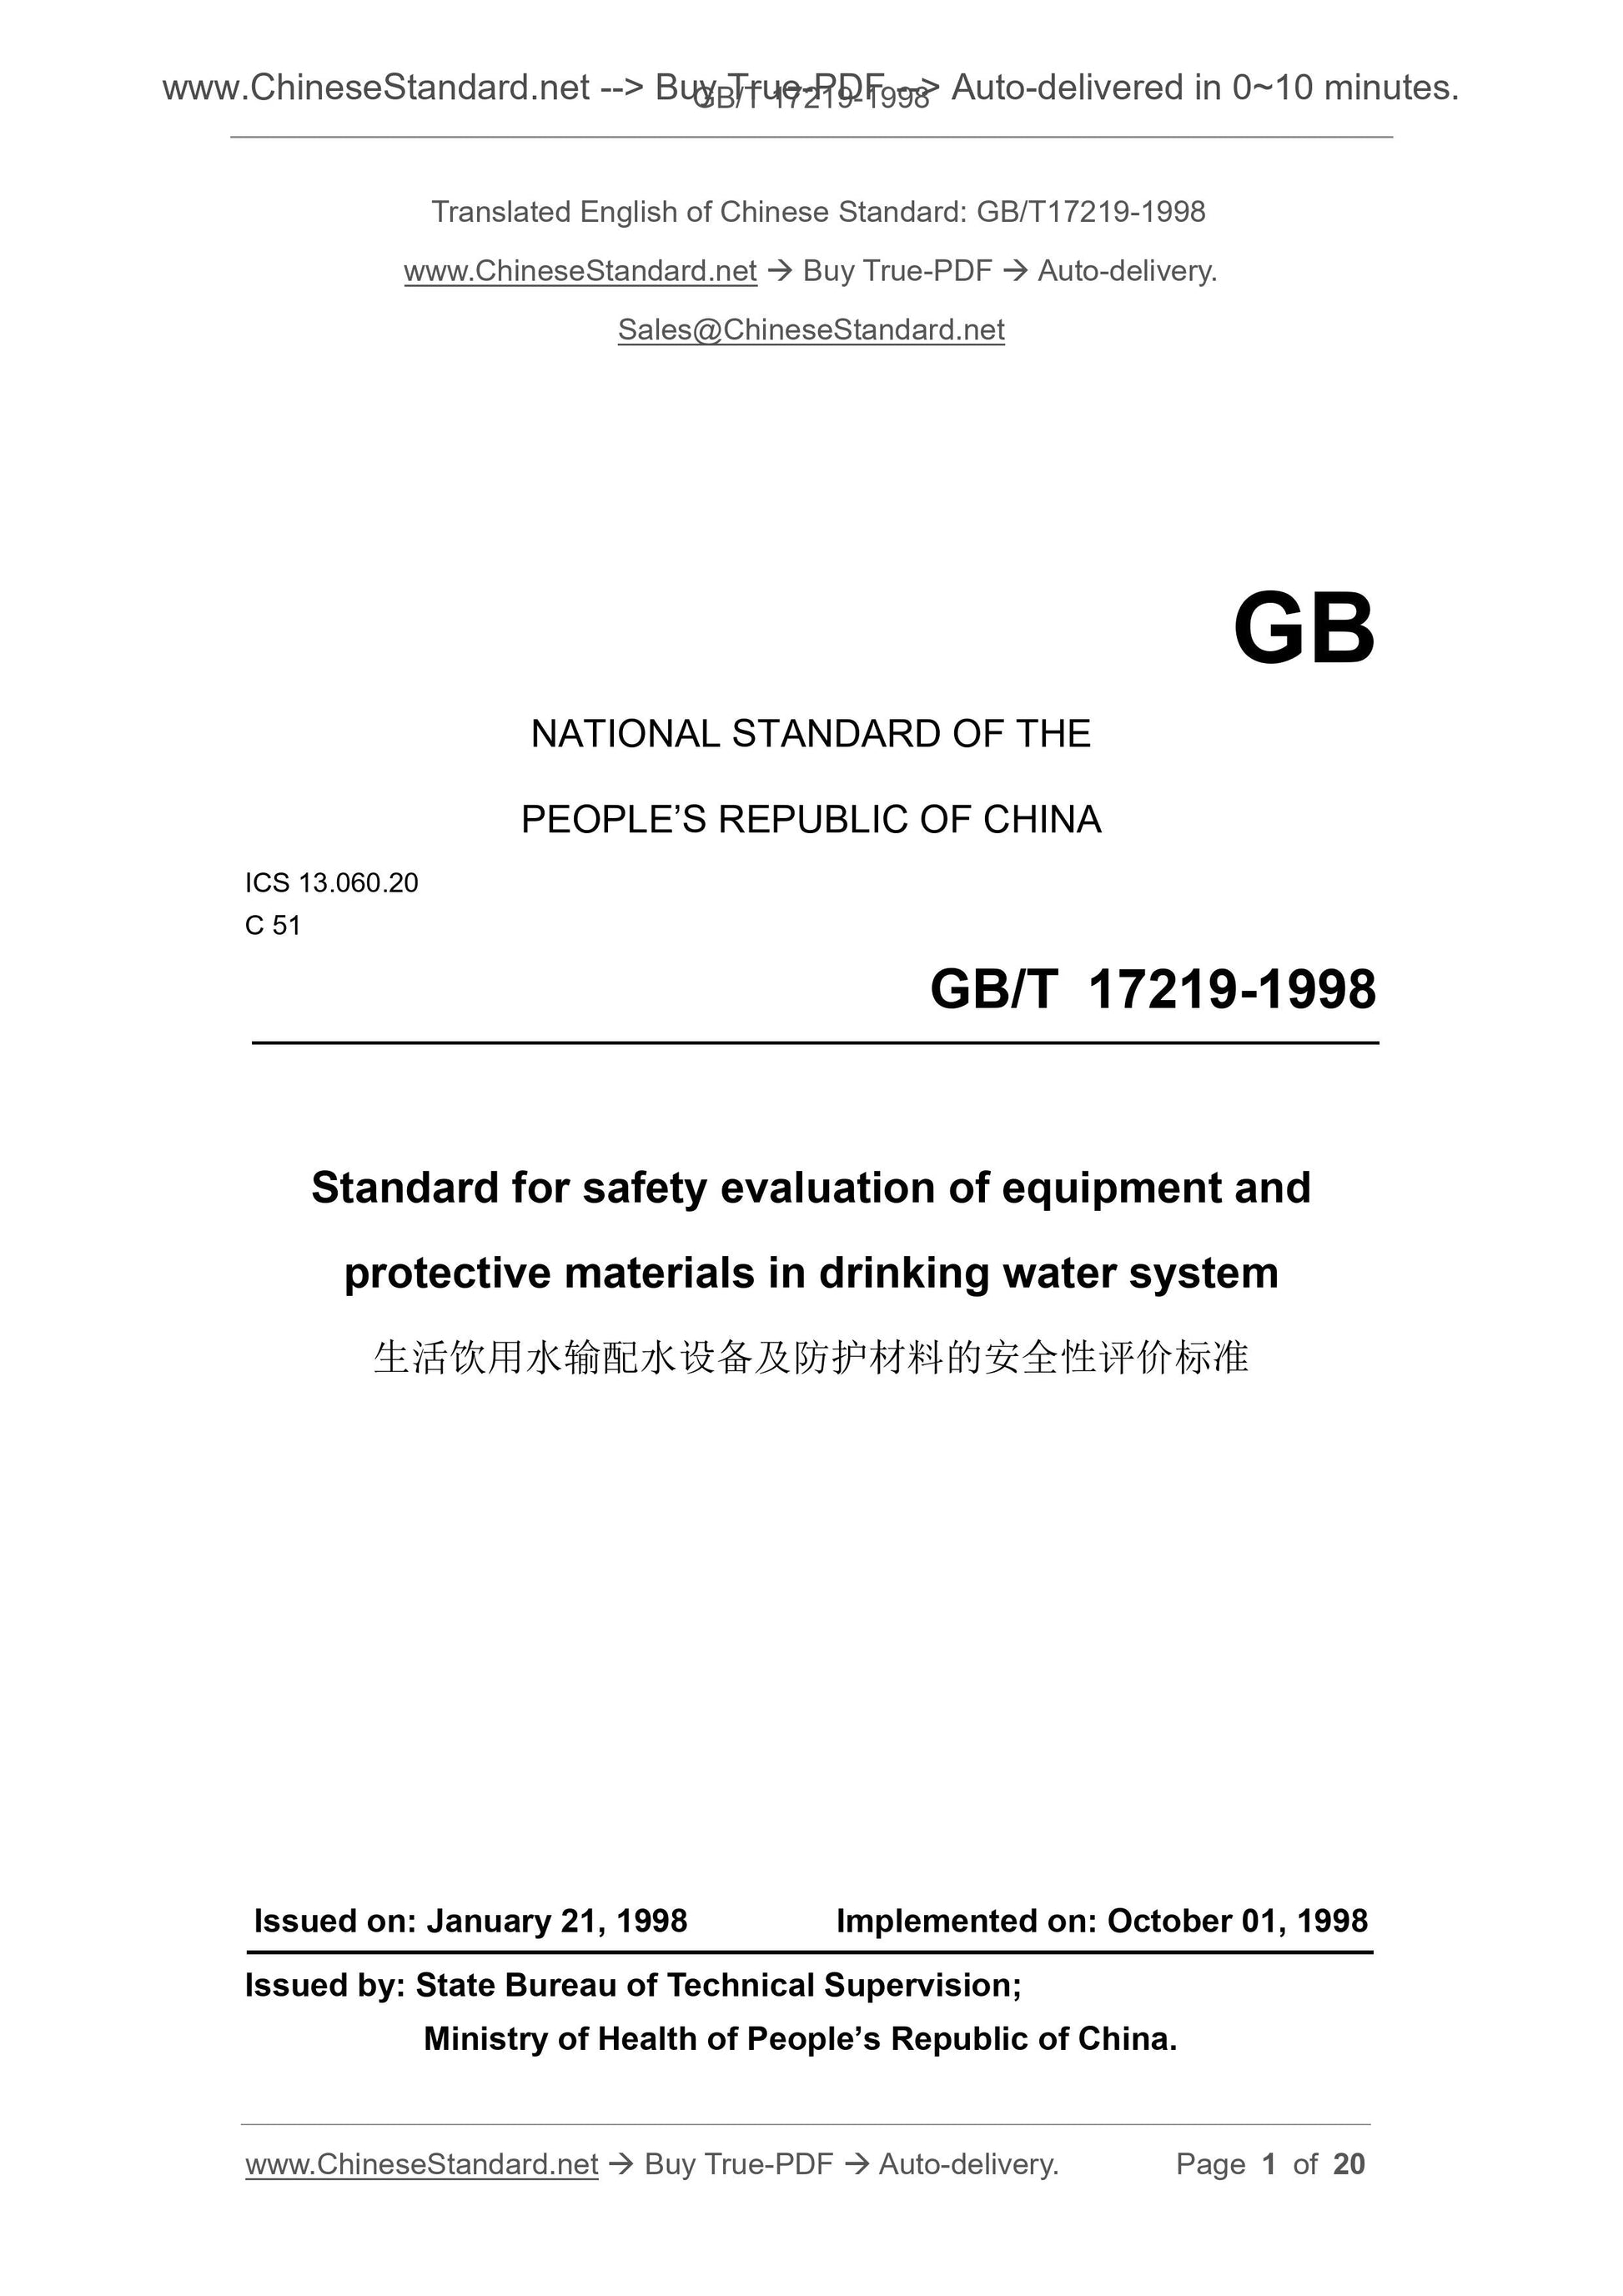 GB/T 17219-1998 Page 1